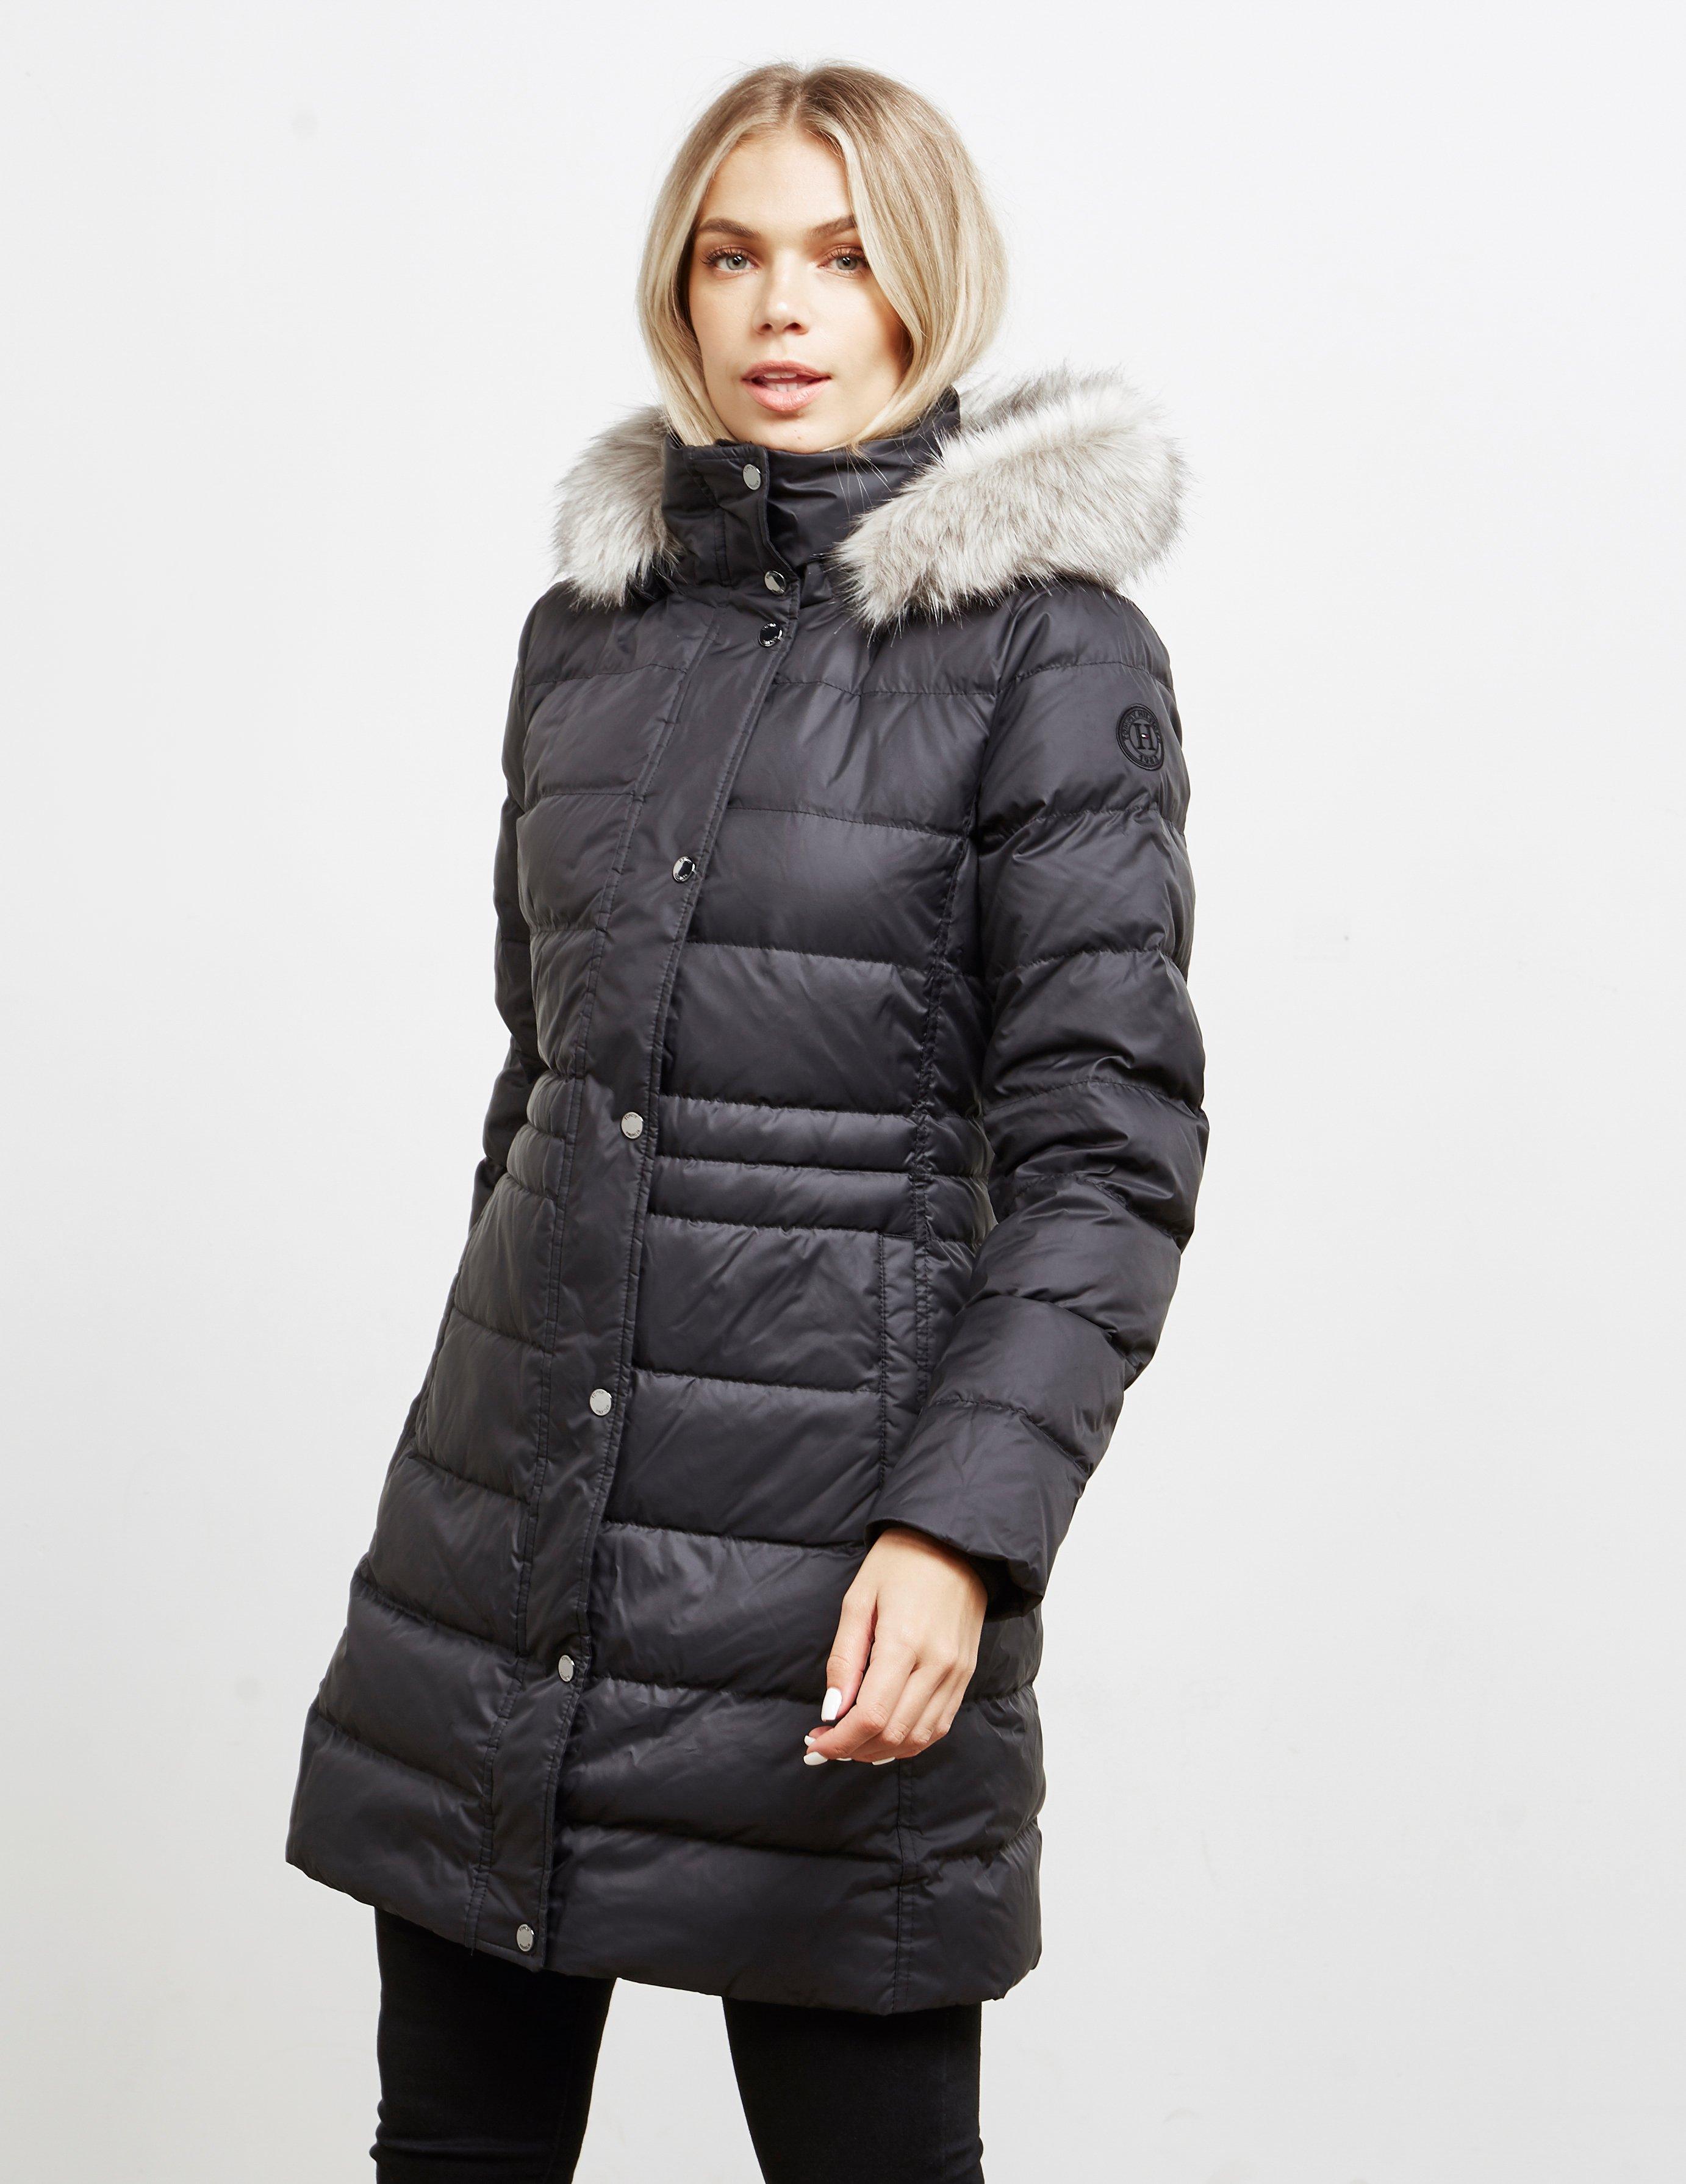 tommy hilfiger women's new tyra down coat